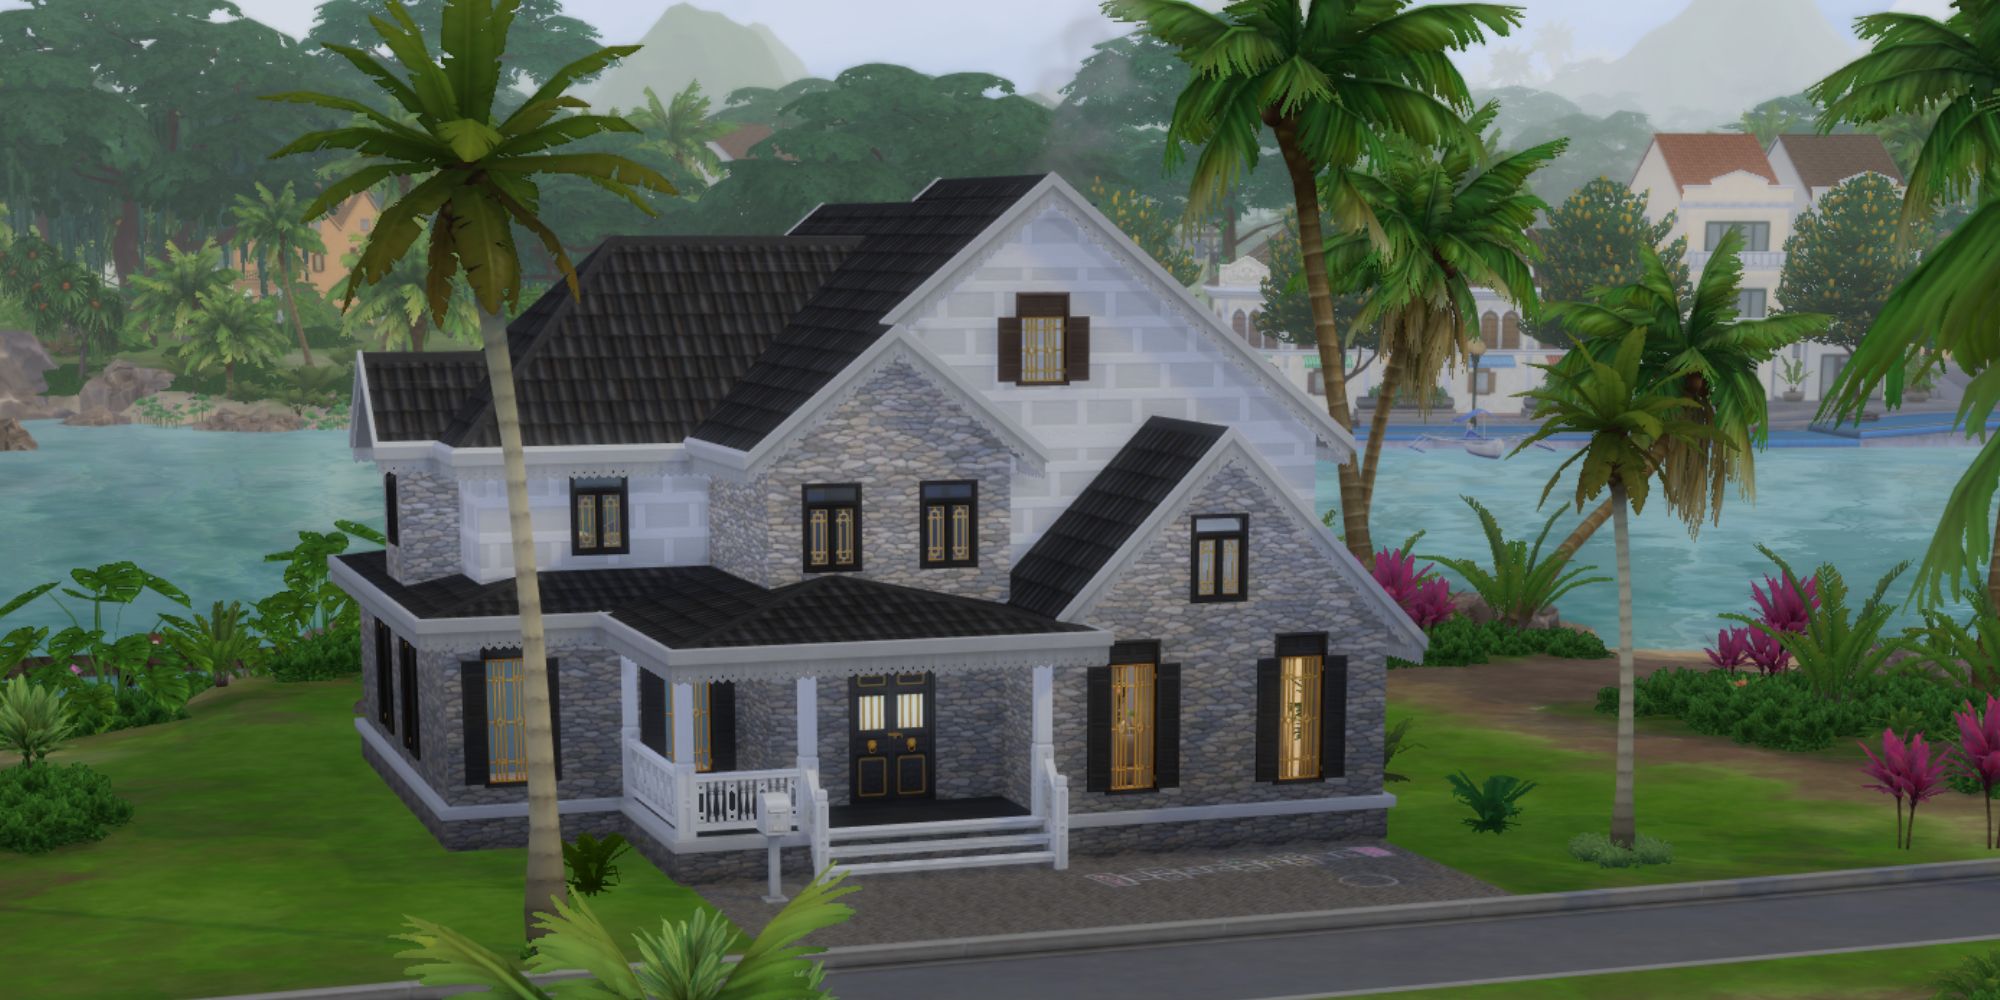 The Sims 4 For Rent House with rooms rented out exterior